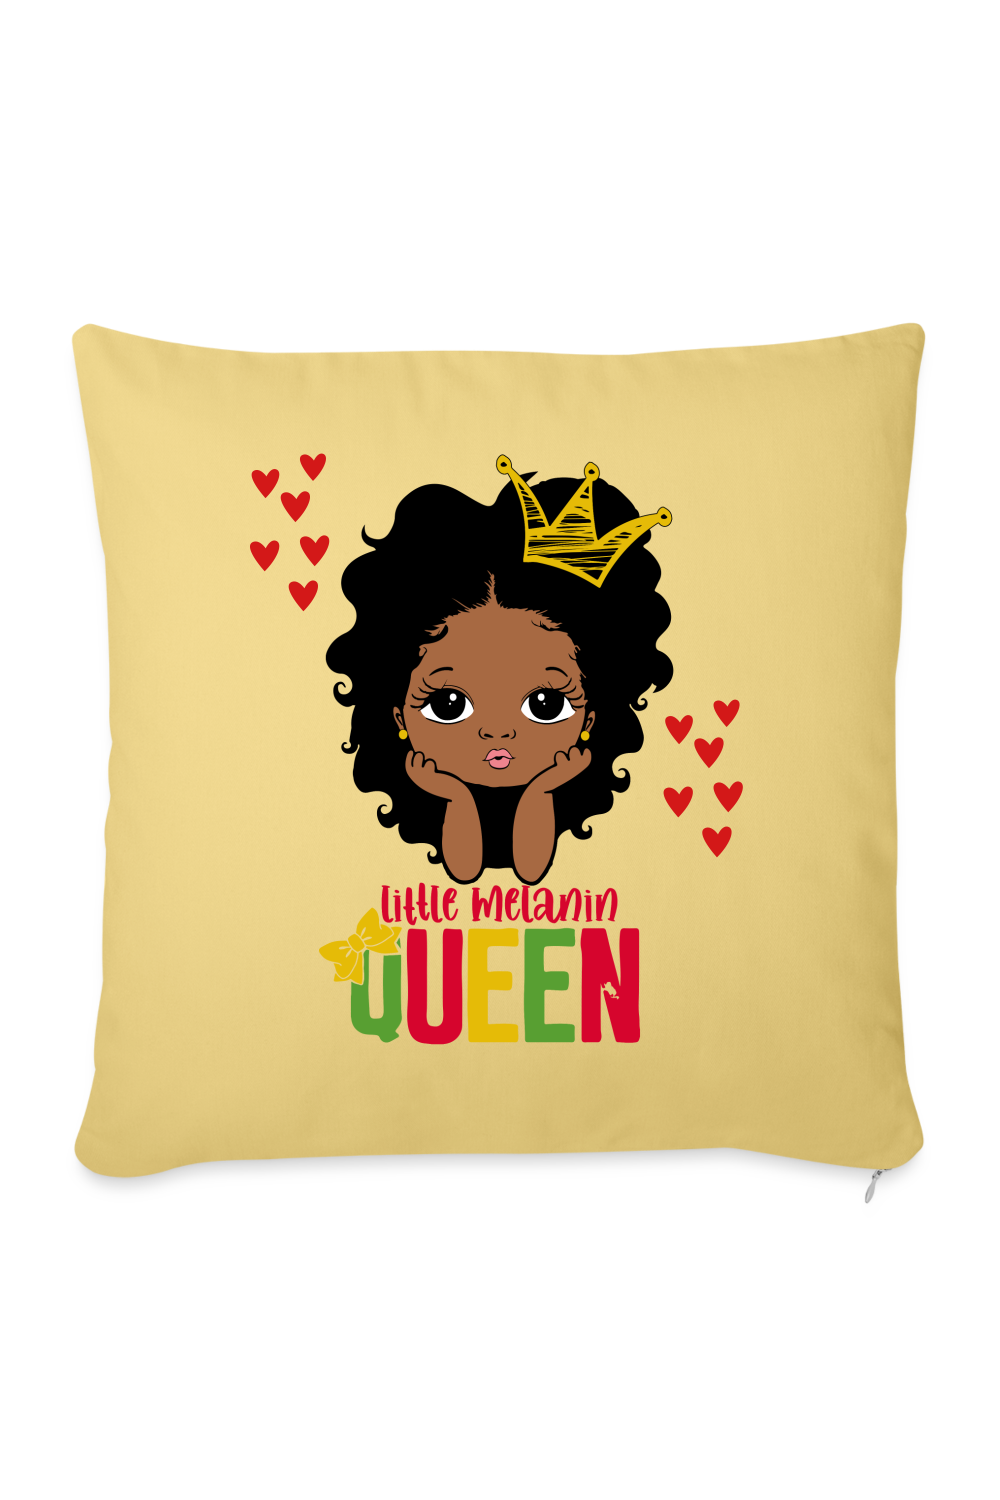 Little Melanin Queen Throw Pillow Cover 18” x 18” - washed yellow